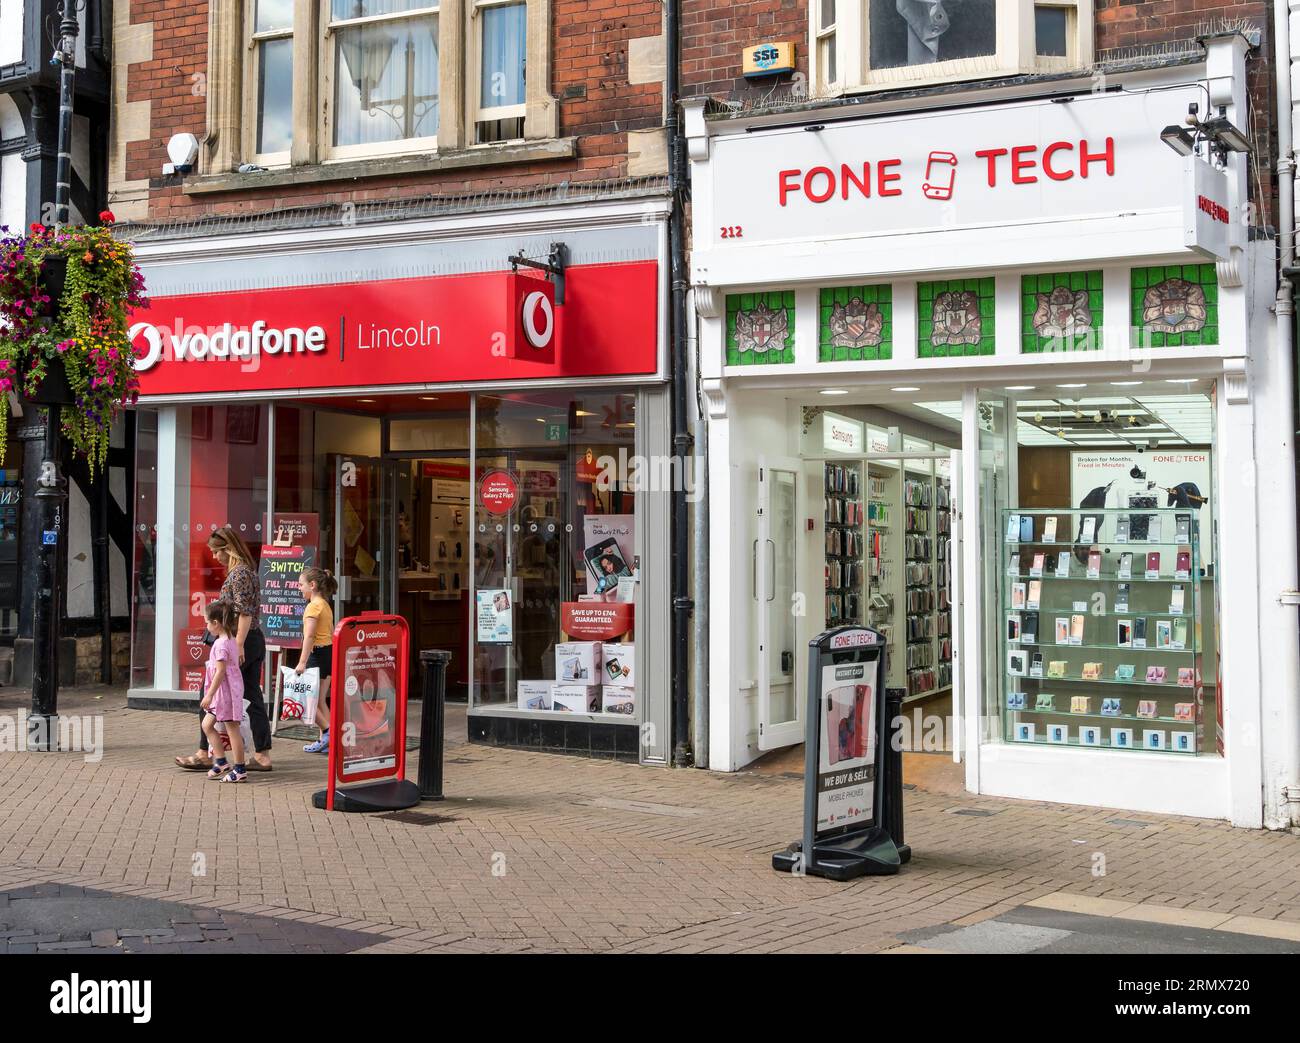 Two mobile phone shops next door, High Street, Lincoln City, Lincolnshire, England, UK Stock Photo